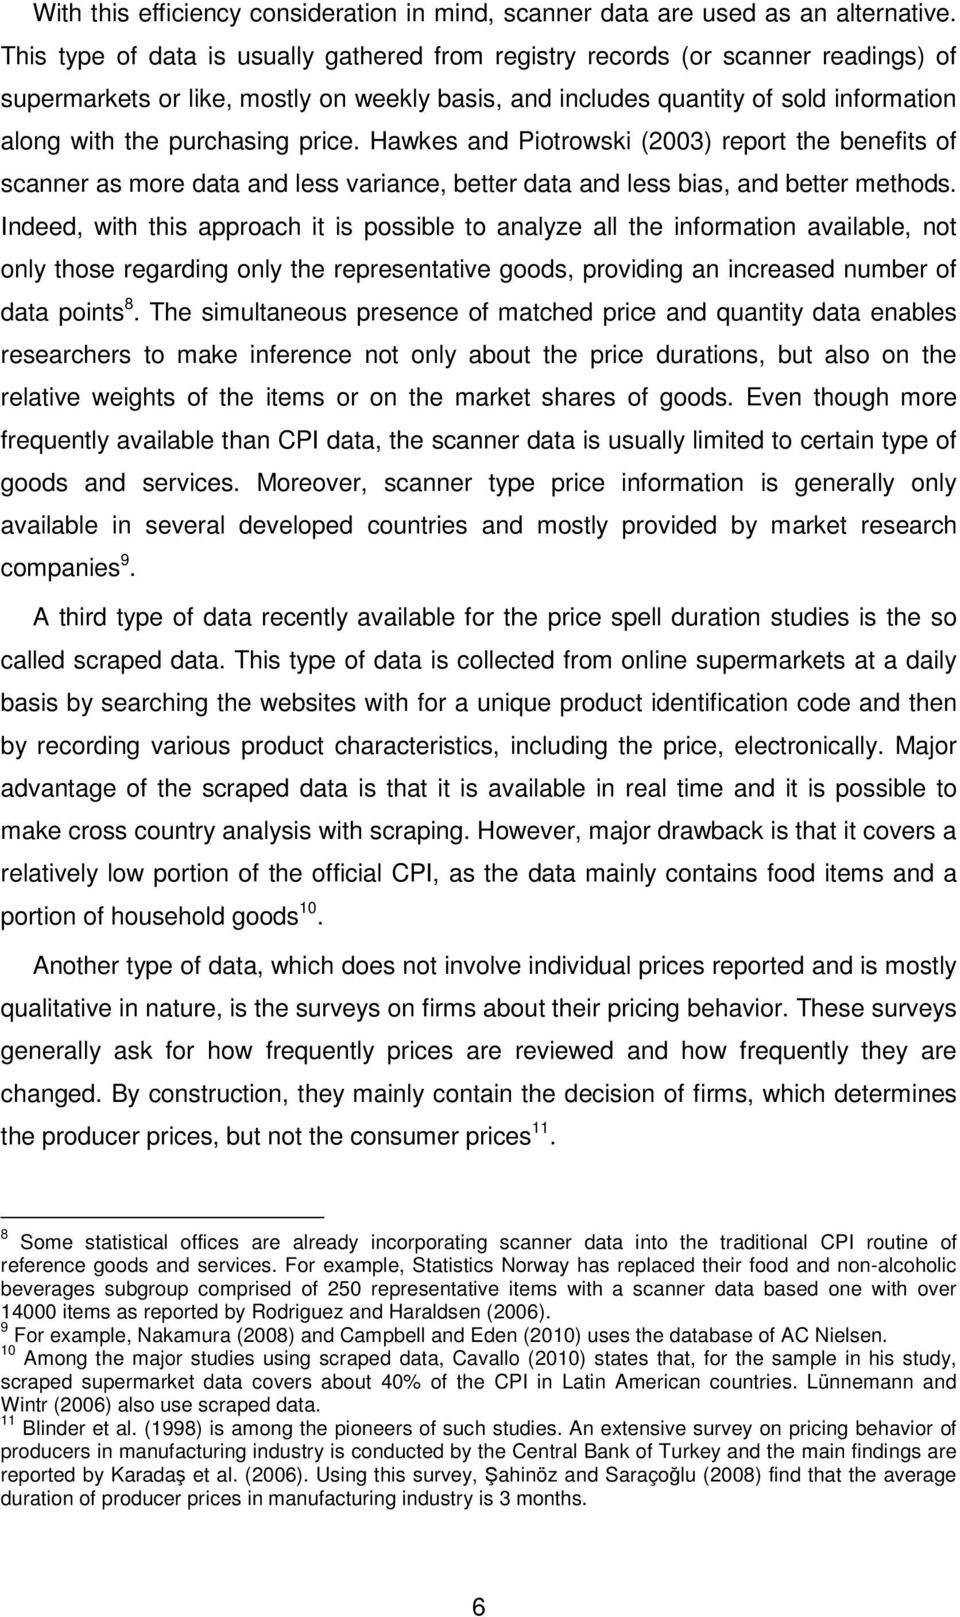 price. Hawkes and Piotrowski (2003) report the benefits of scanner as more data and less variance, better data and less bias, and better methods.